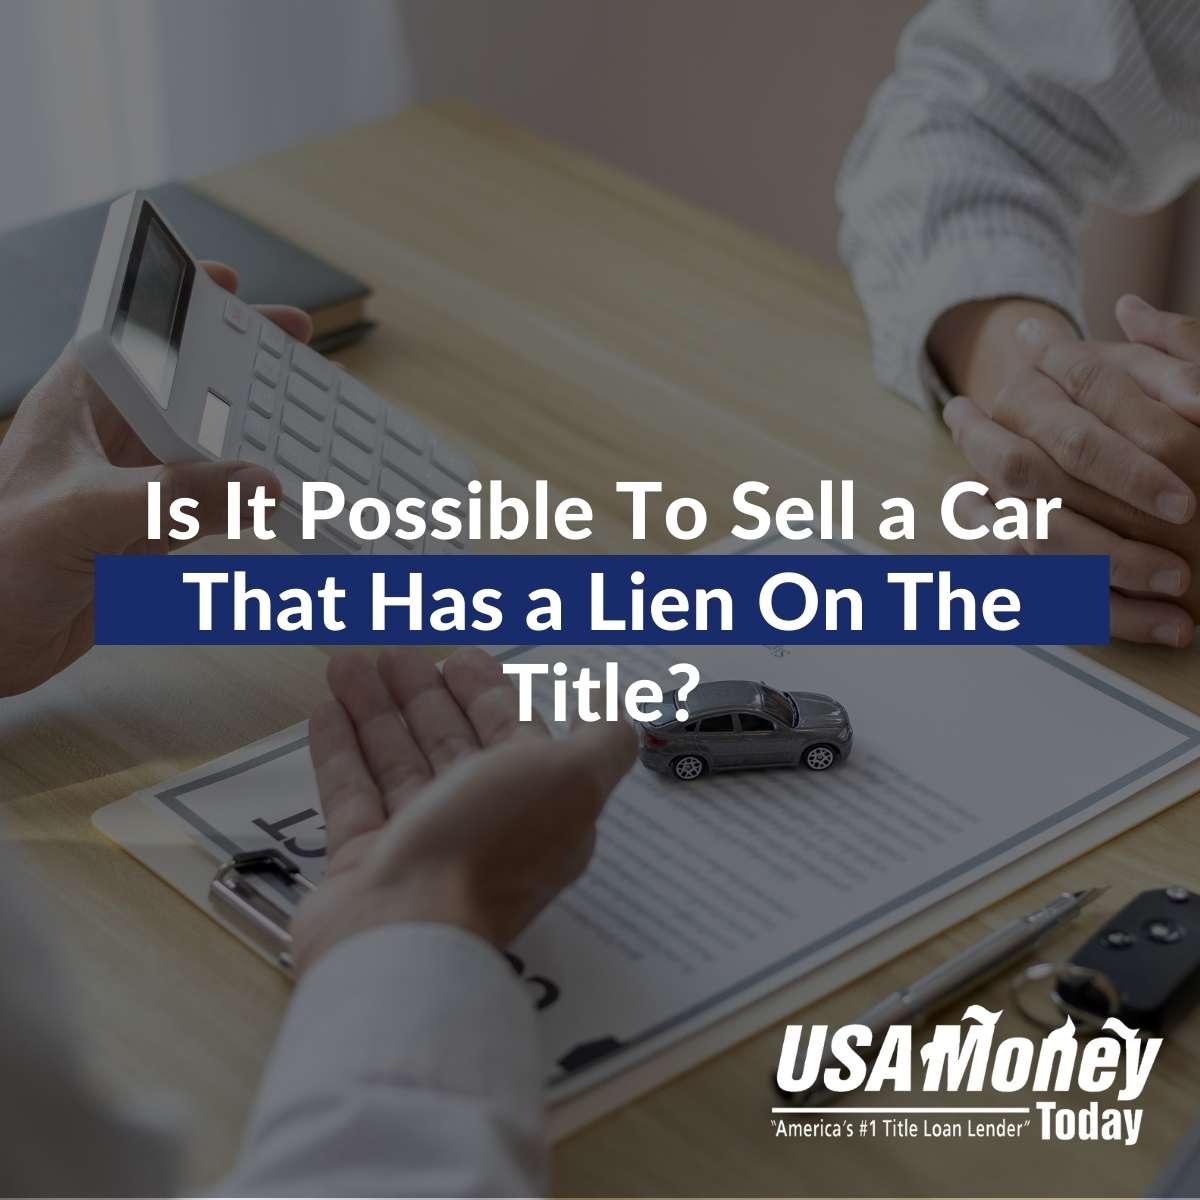 Is It Possible To Sell a Car That Has a Lien On The Title